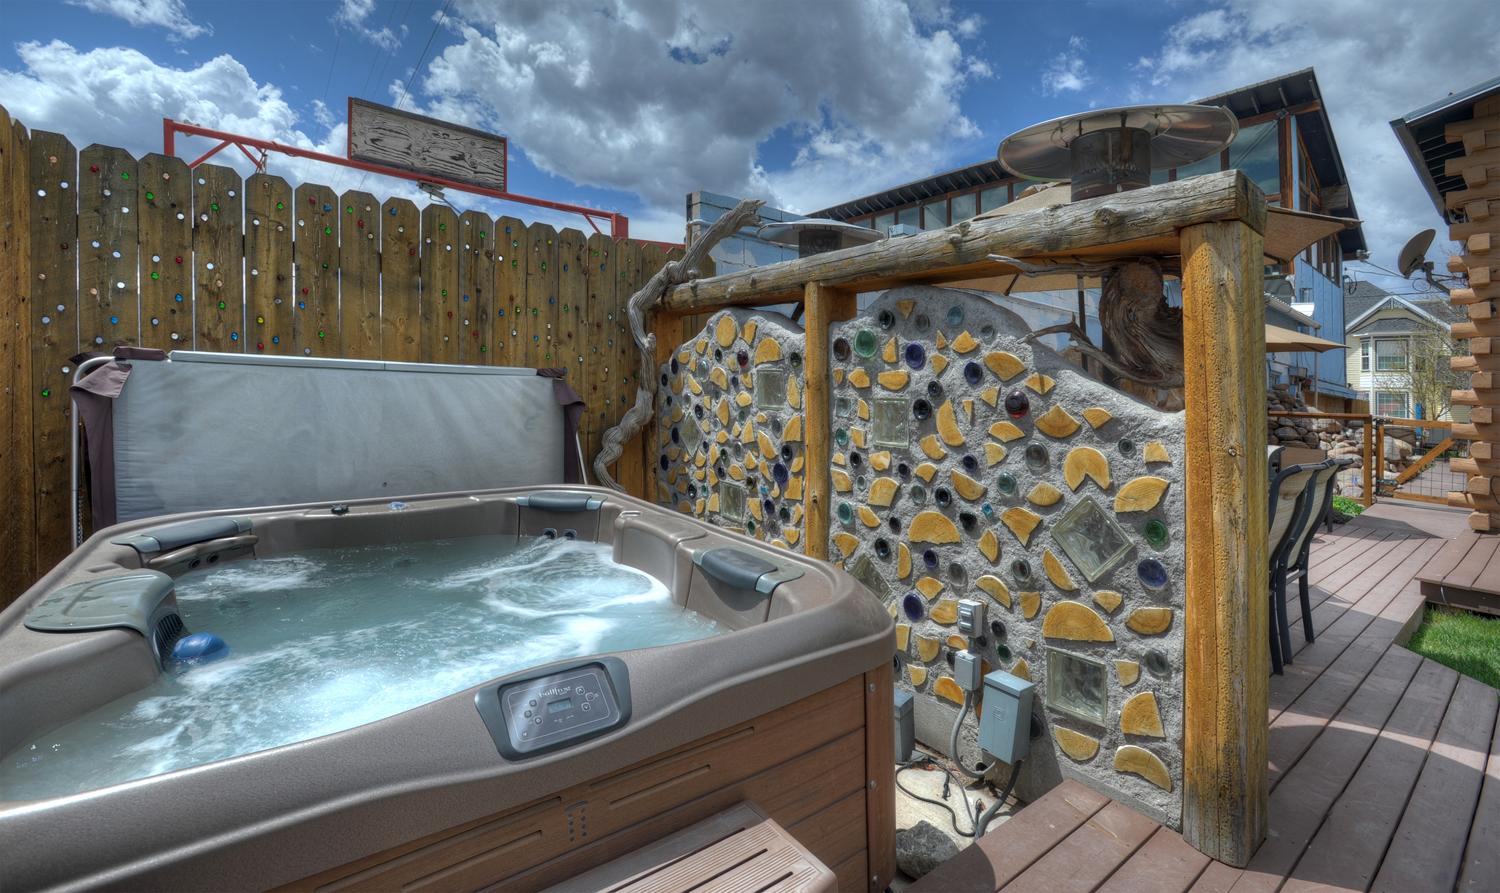 Private Hot Tub that backs up against the flume.